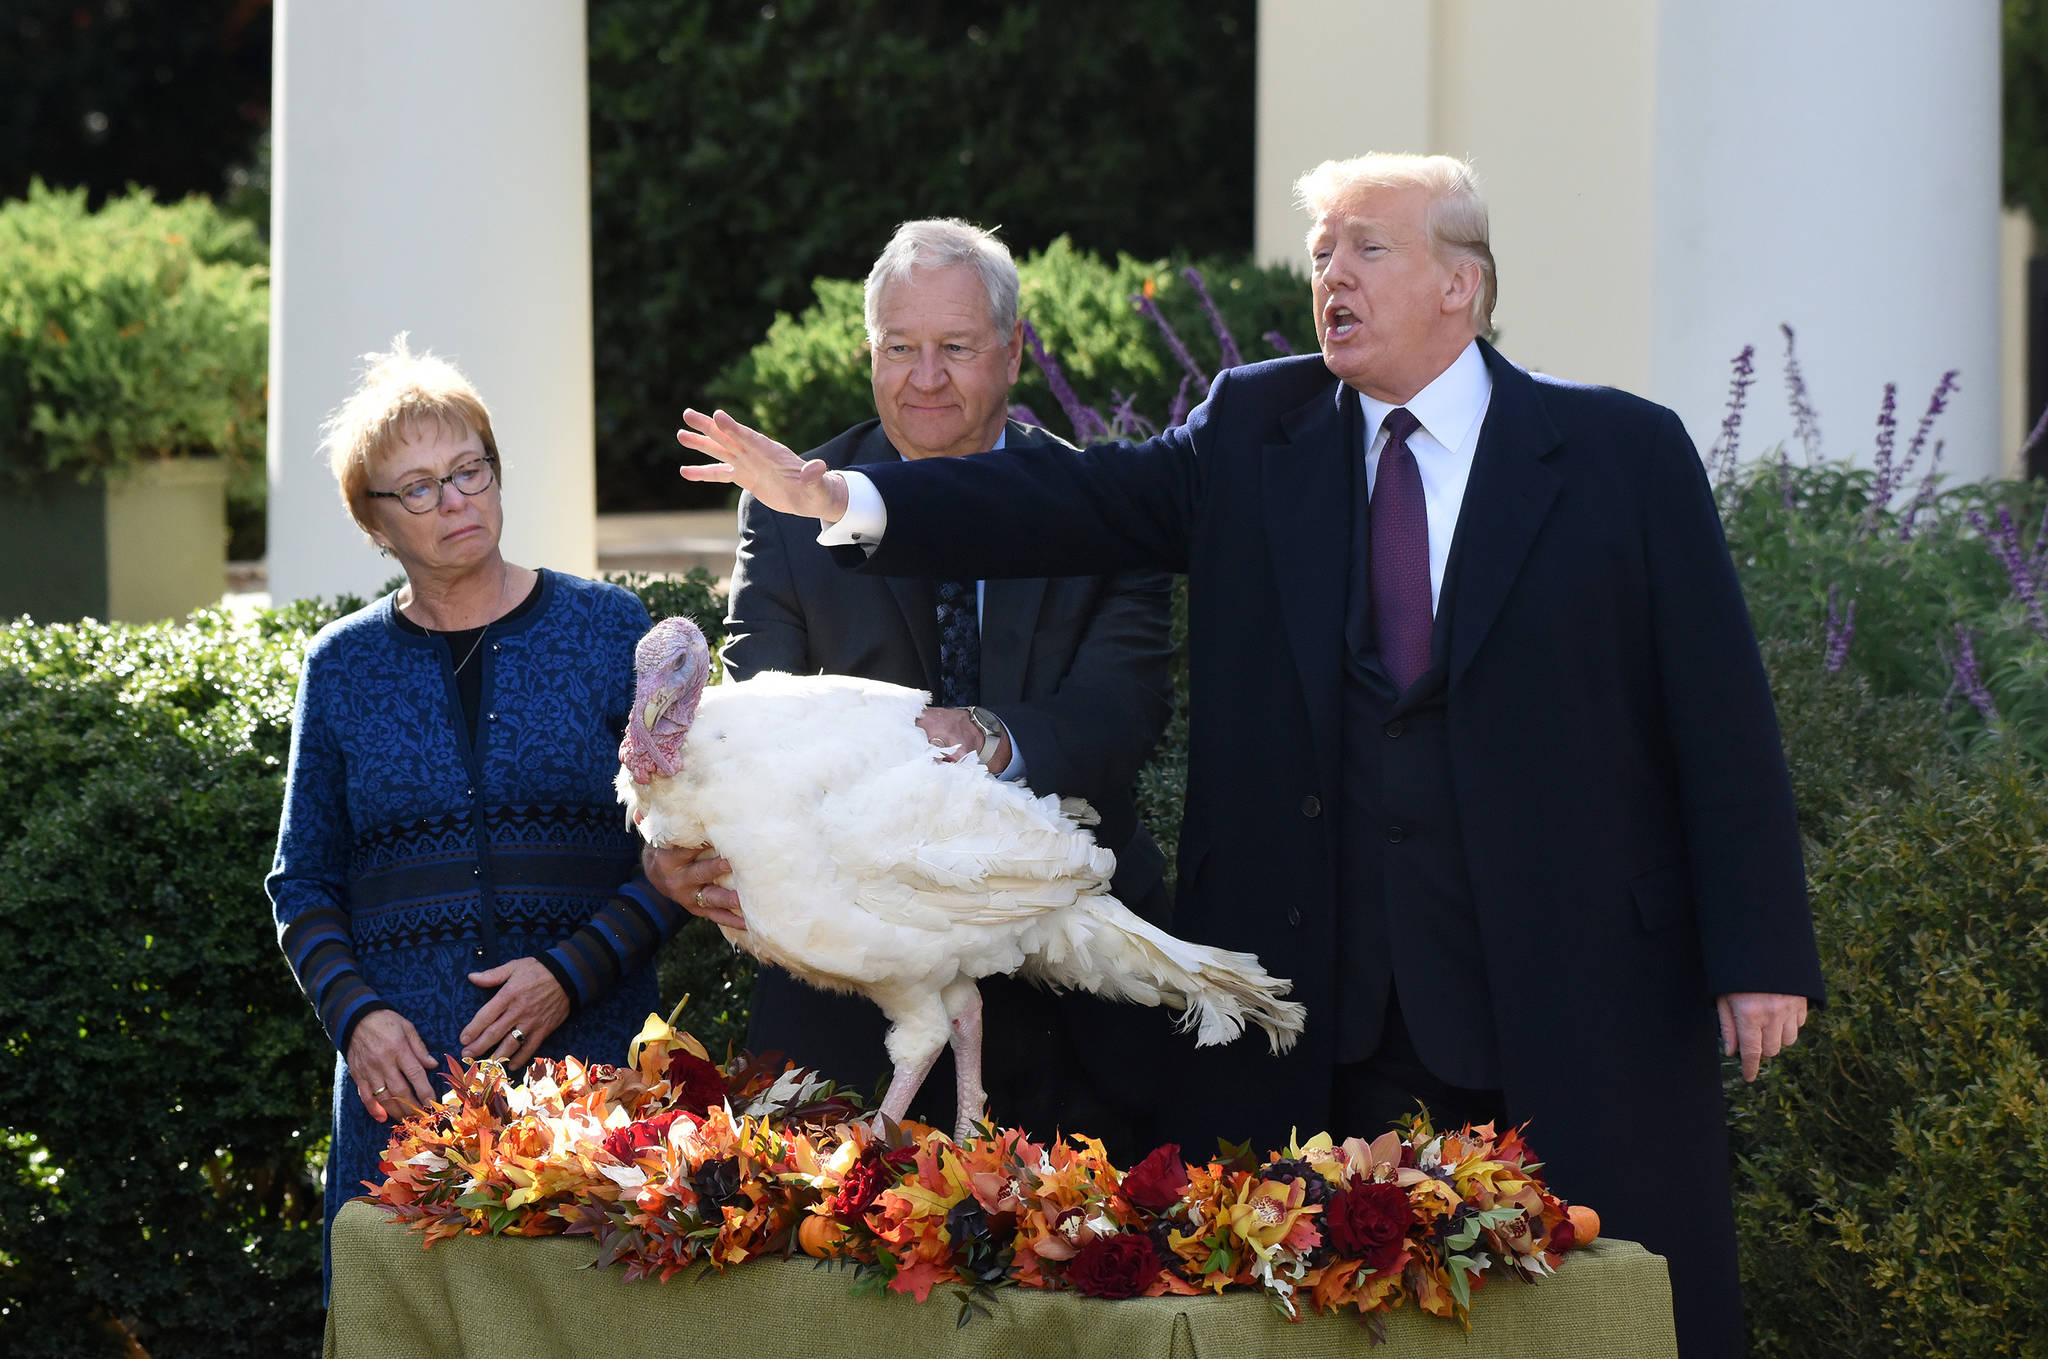 The 2016 election cut Thanksgiving dinners short. Will the 2018 election do the same?